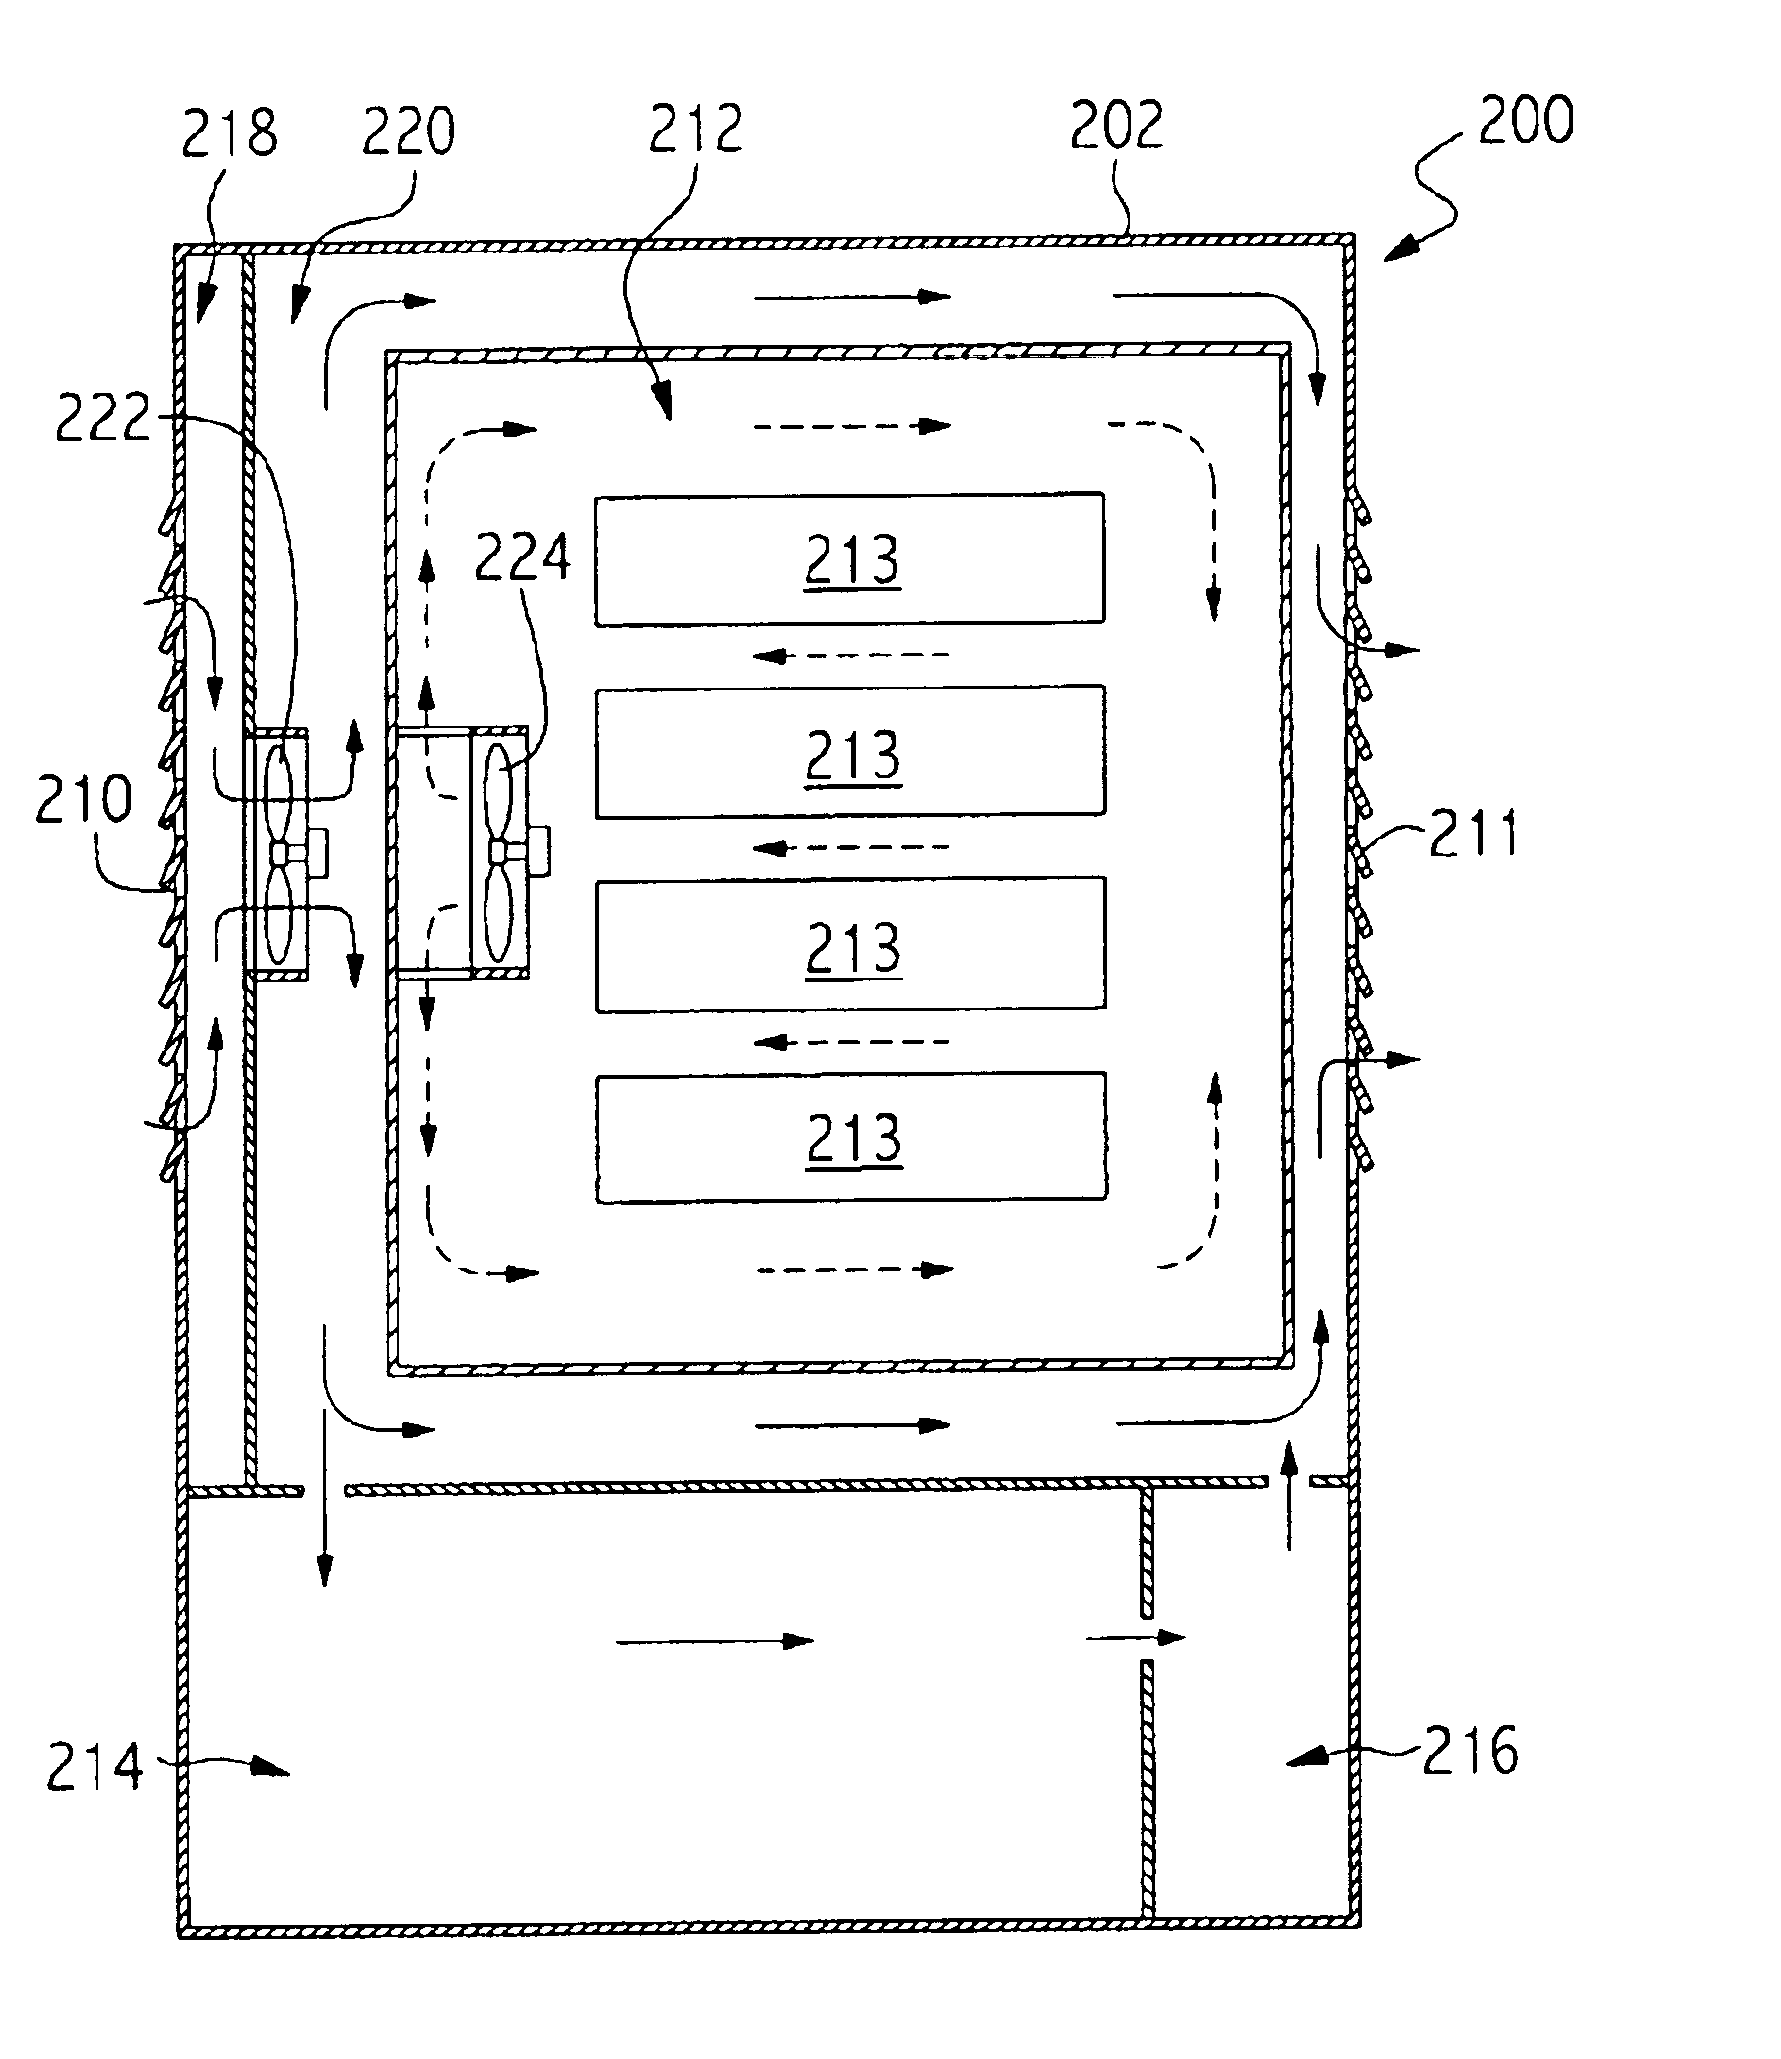 Systems and methods for weatherproof cabinets with variably cooled compartments